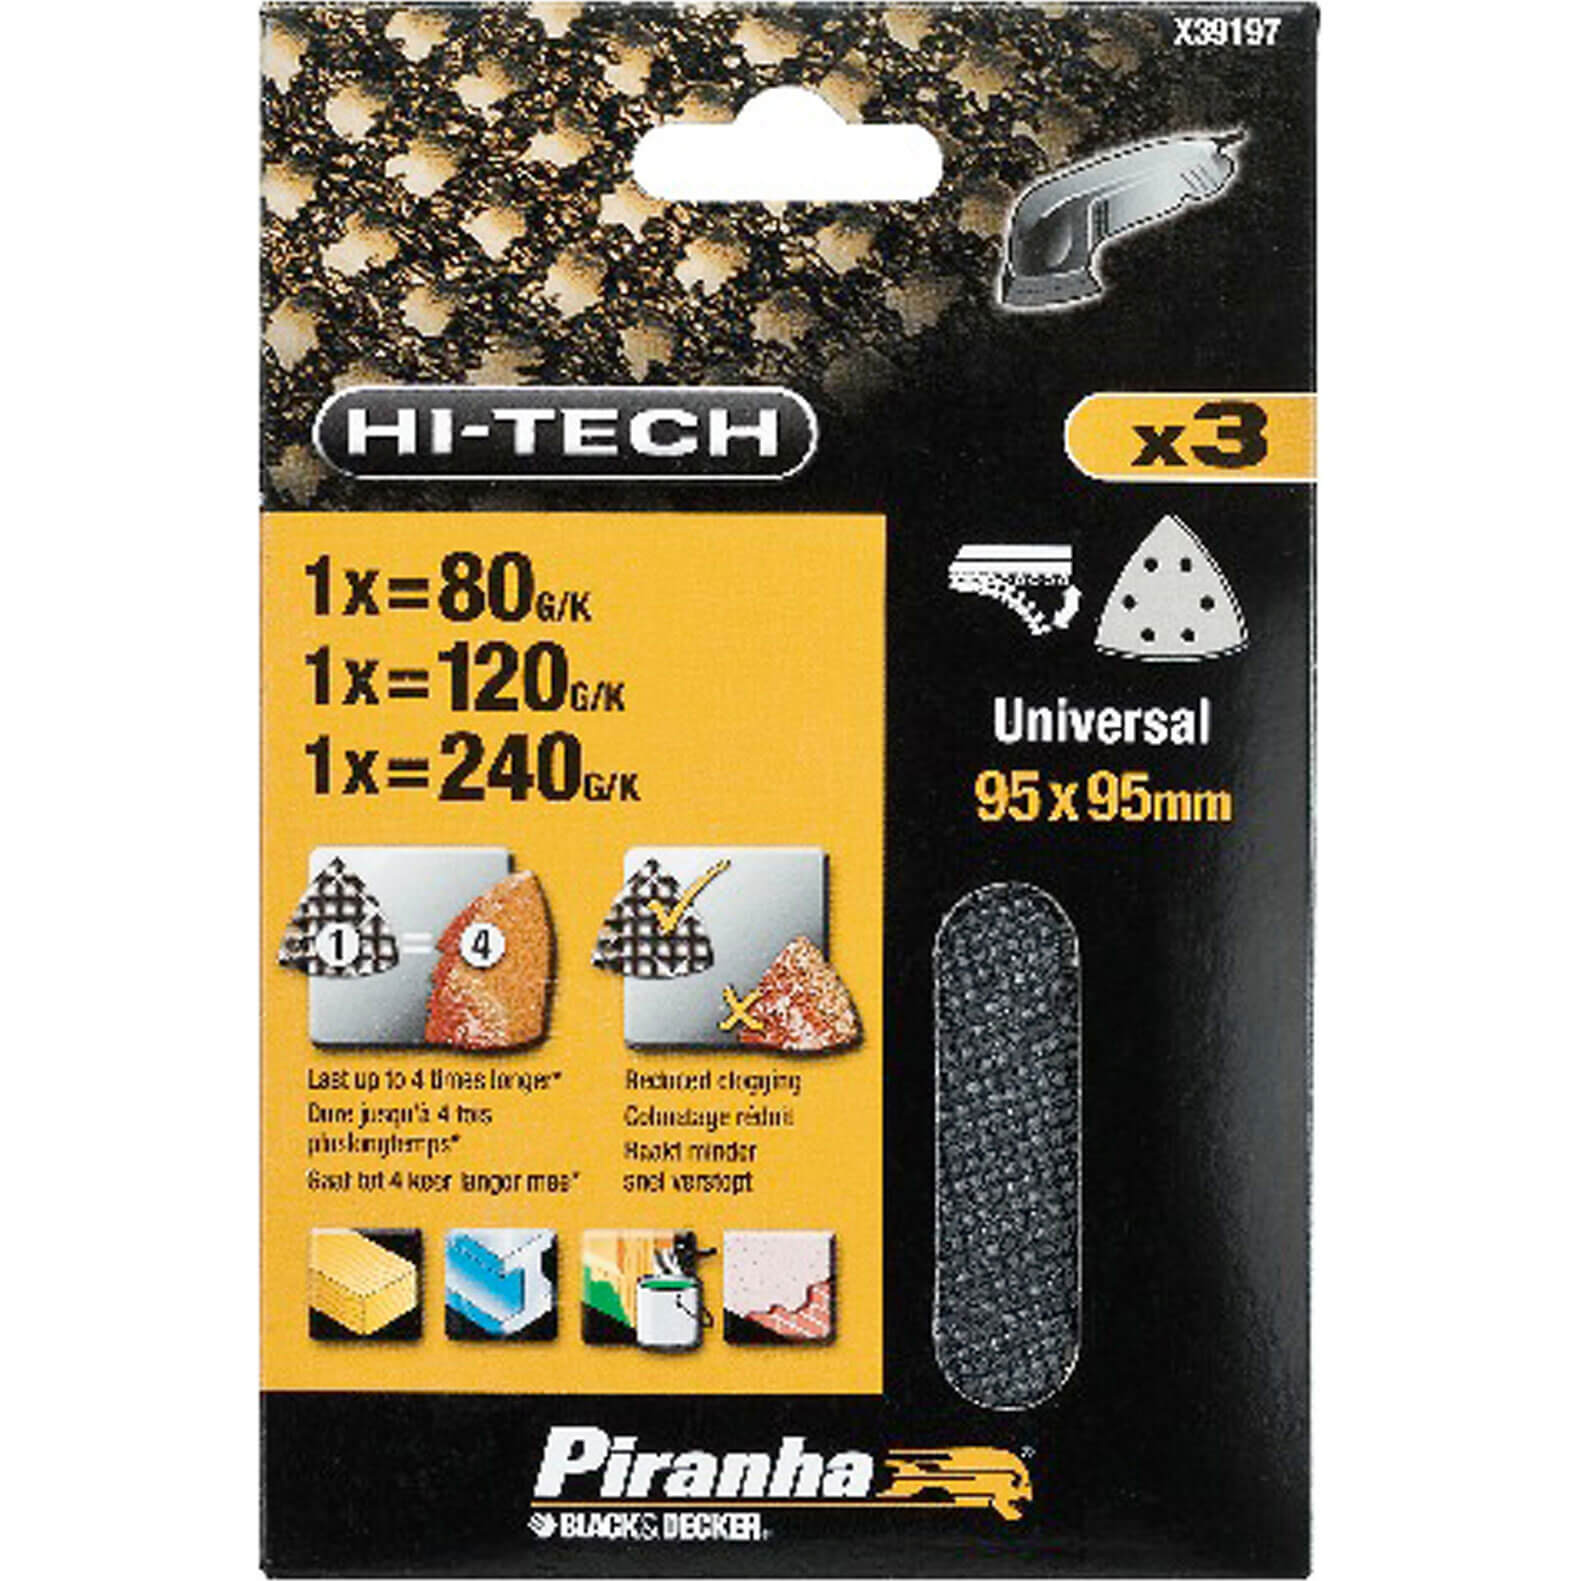 Image of Black and Decker Piranha Hi Tech Quick Fit Mesh Delta Sanding Sheets 95mm x 95mm Assorted Pack of 3